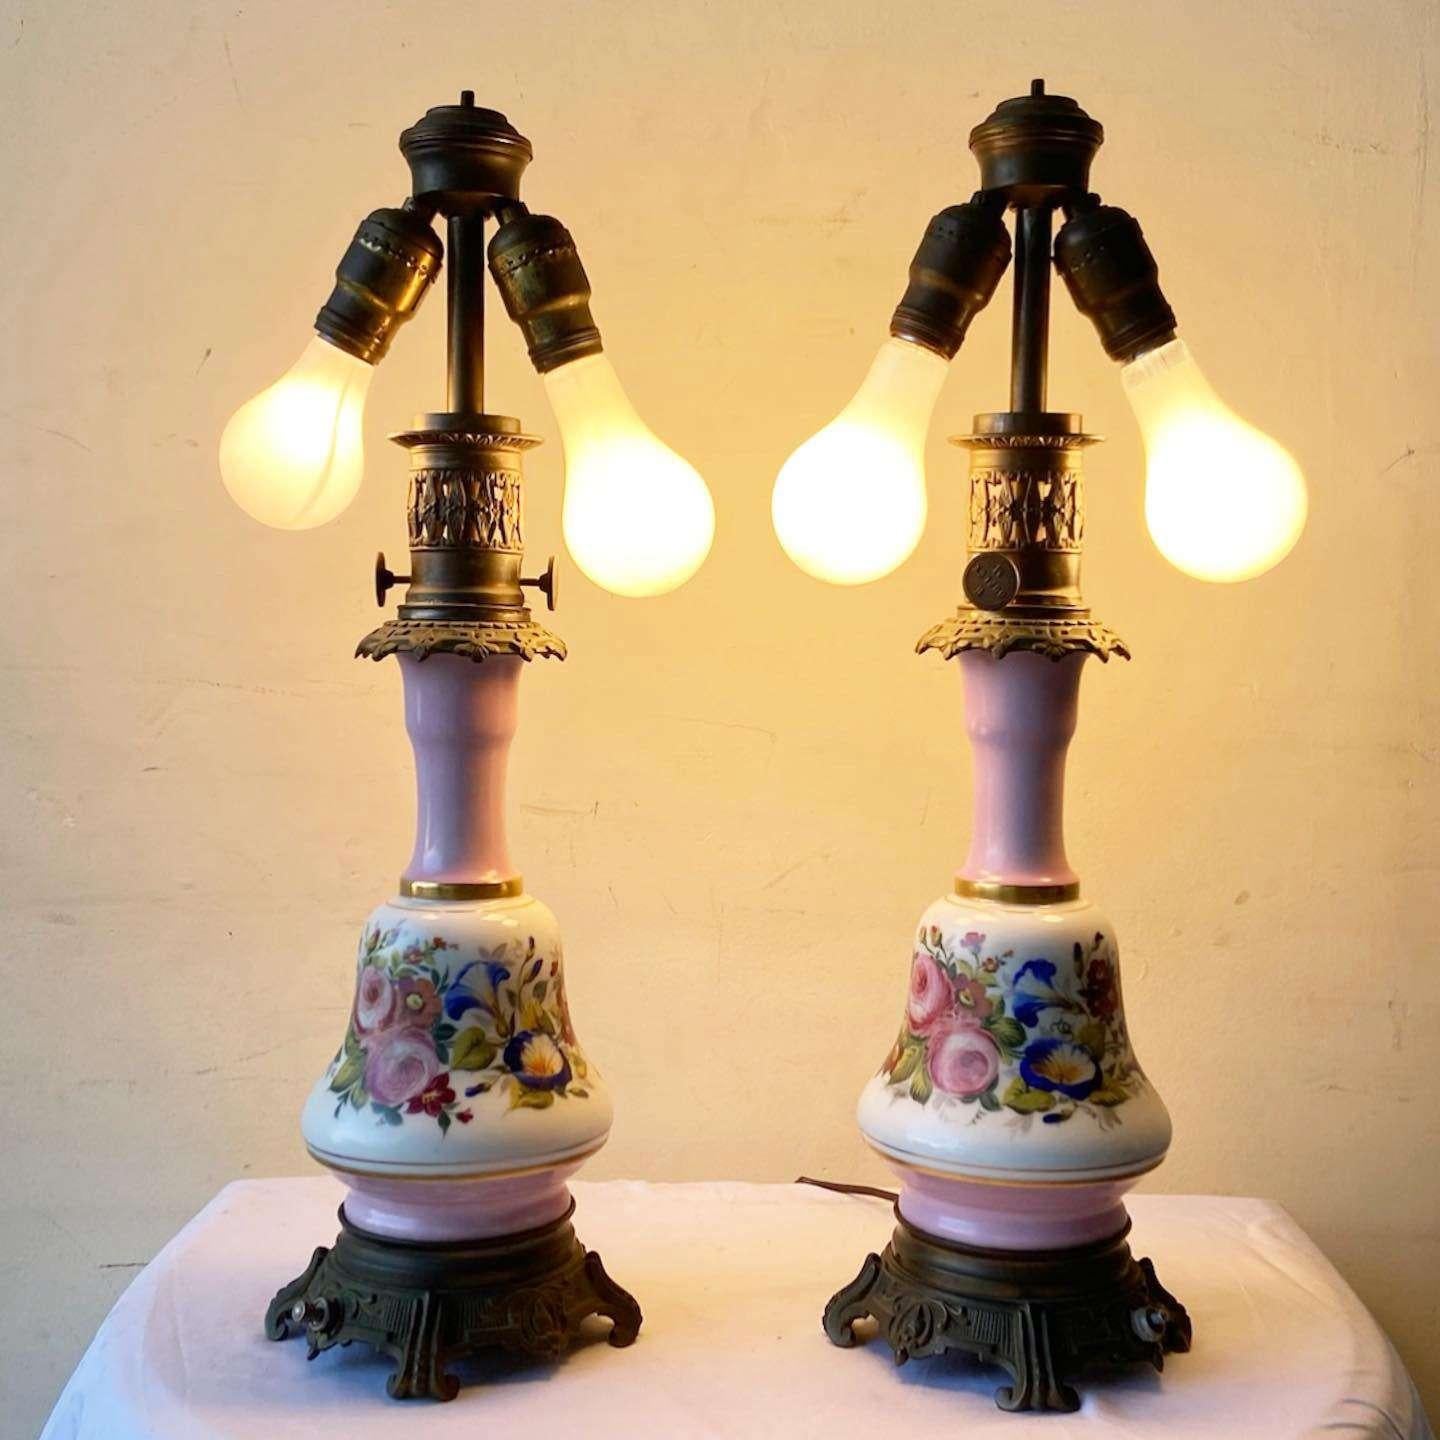 Mid-20th Century Vintage French Pink and White Porcelain and Brass Table Lamps - a Pair For Sale